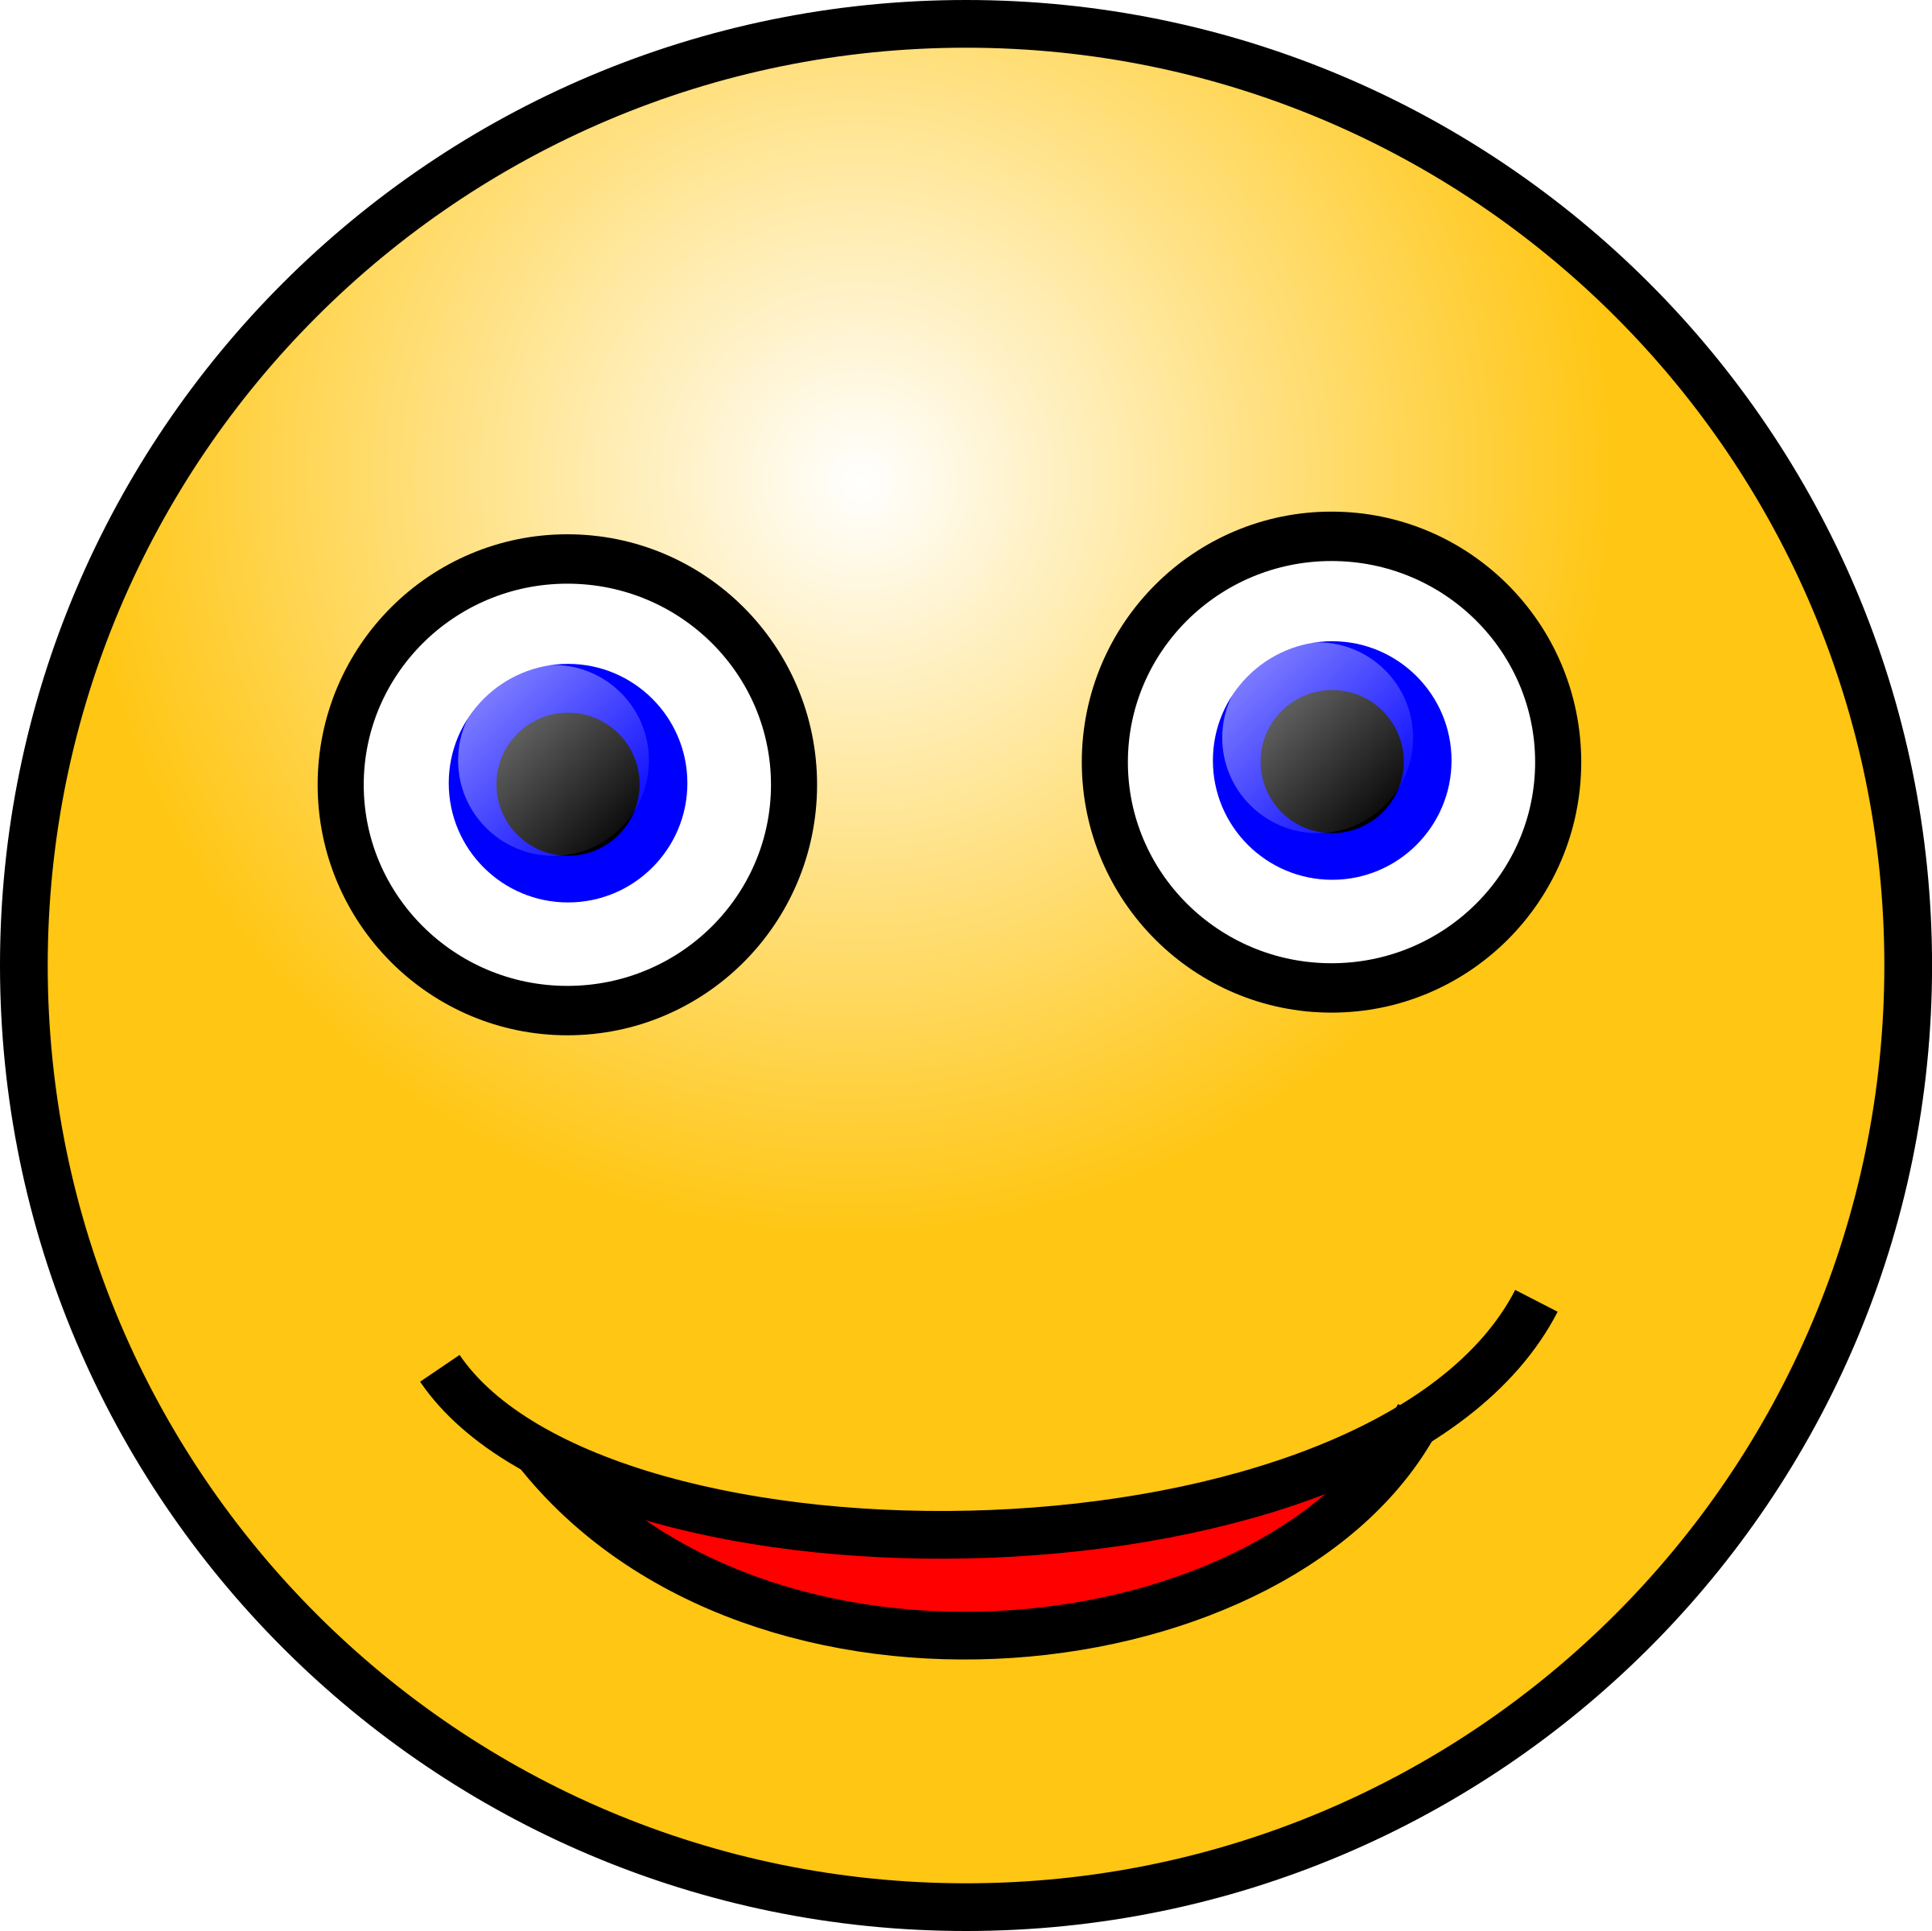 Clipart Of Smiling Faces Clipart Best Images And Photos Finder